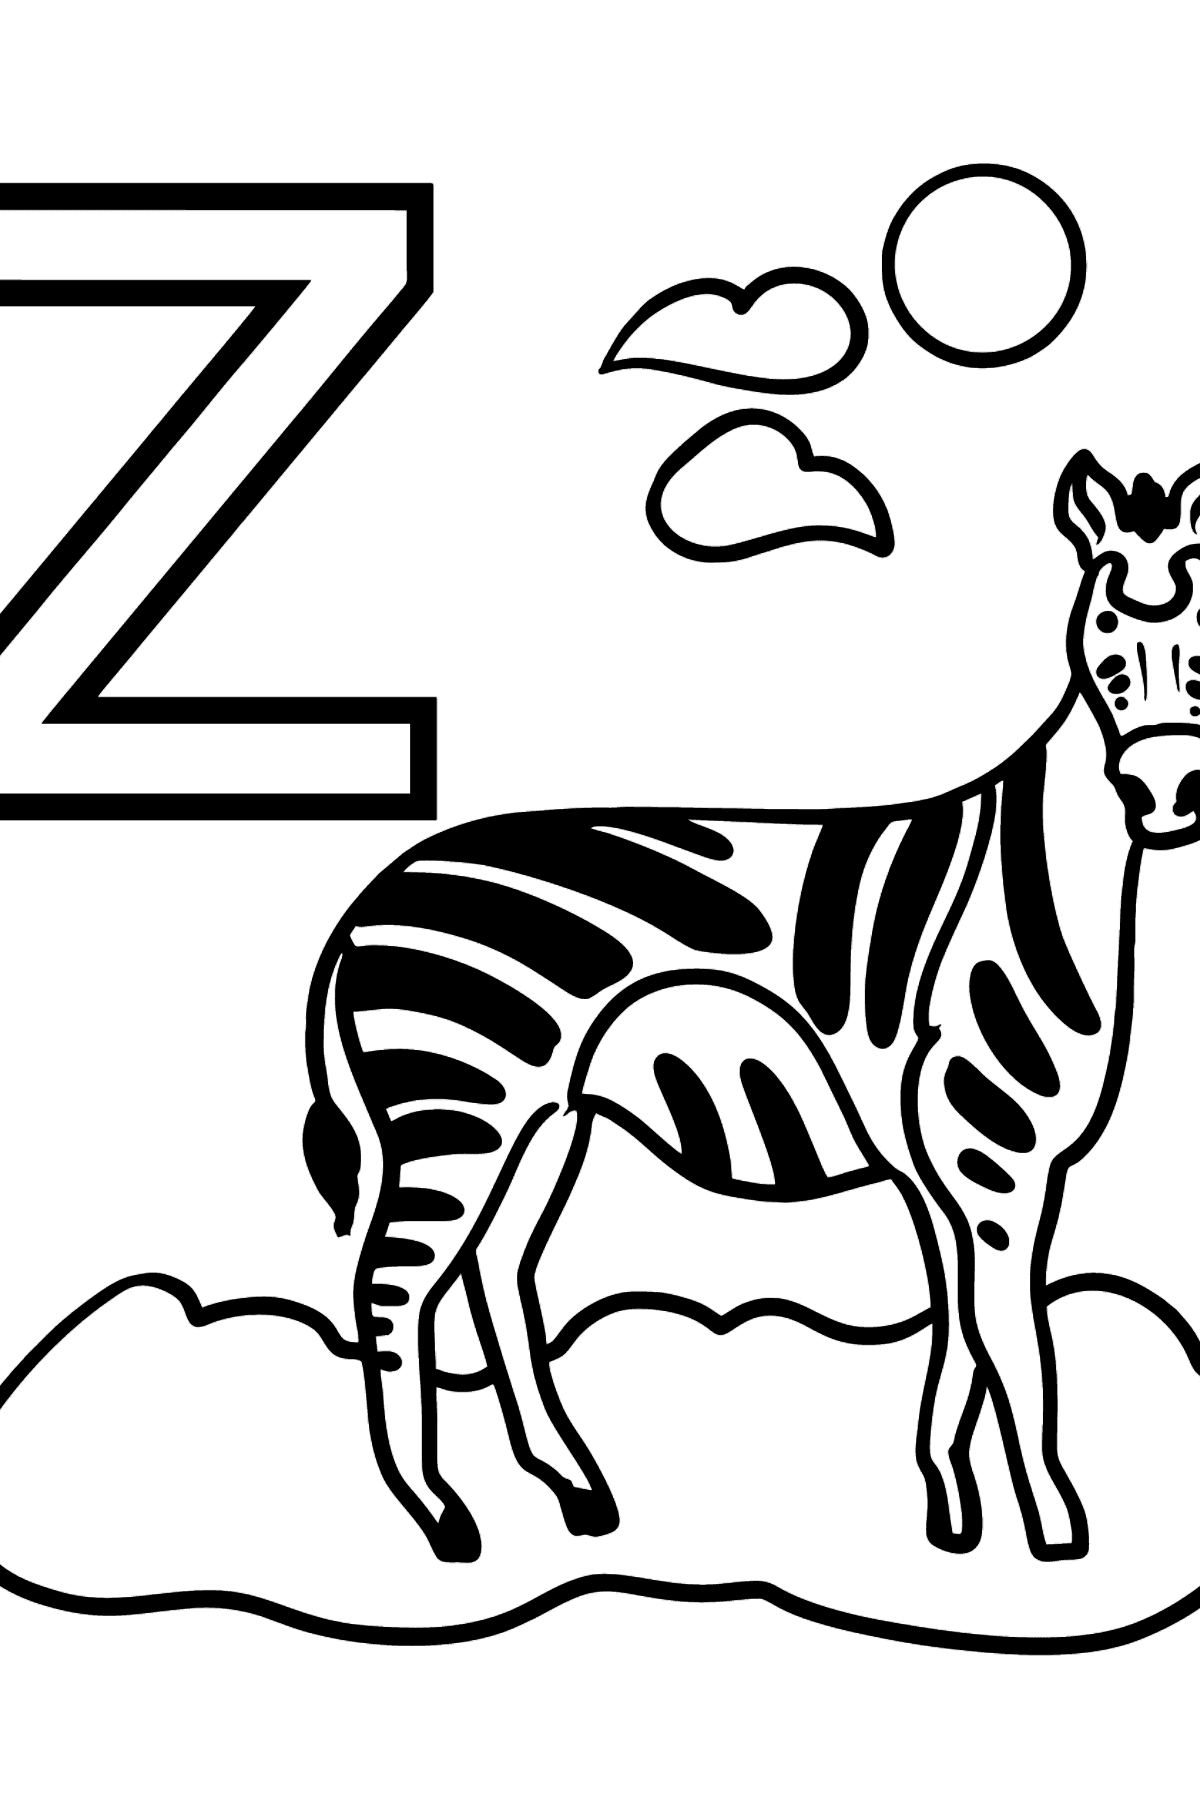 Portuguese Letter Z coloring pages - ZEBRA - Coloring Pages for Kids